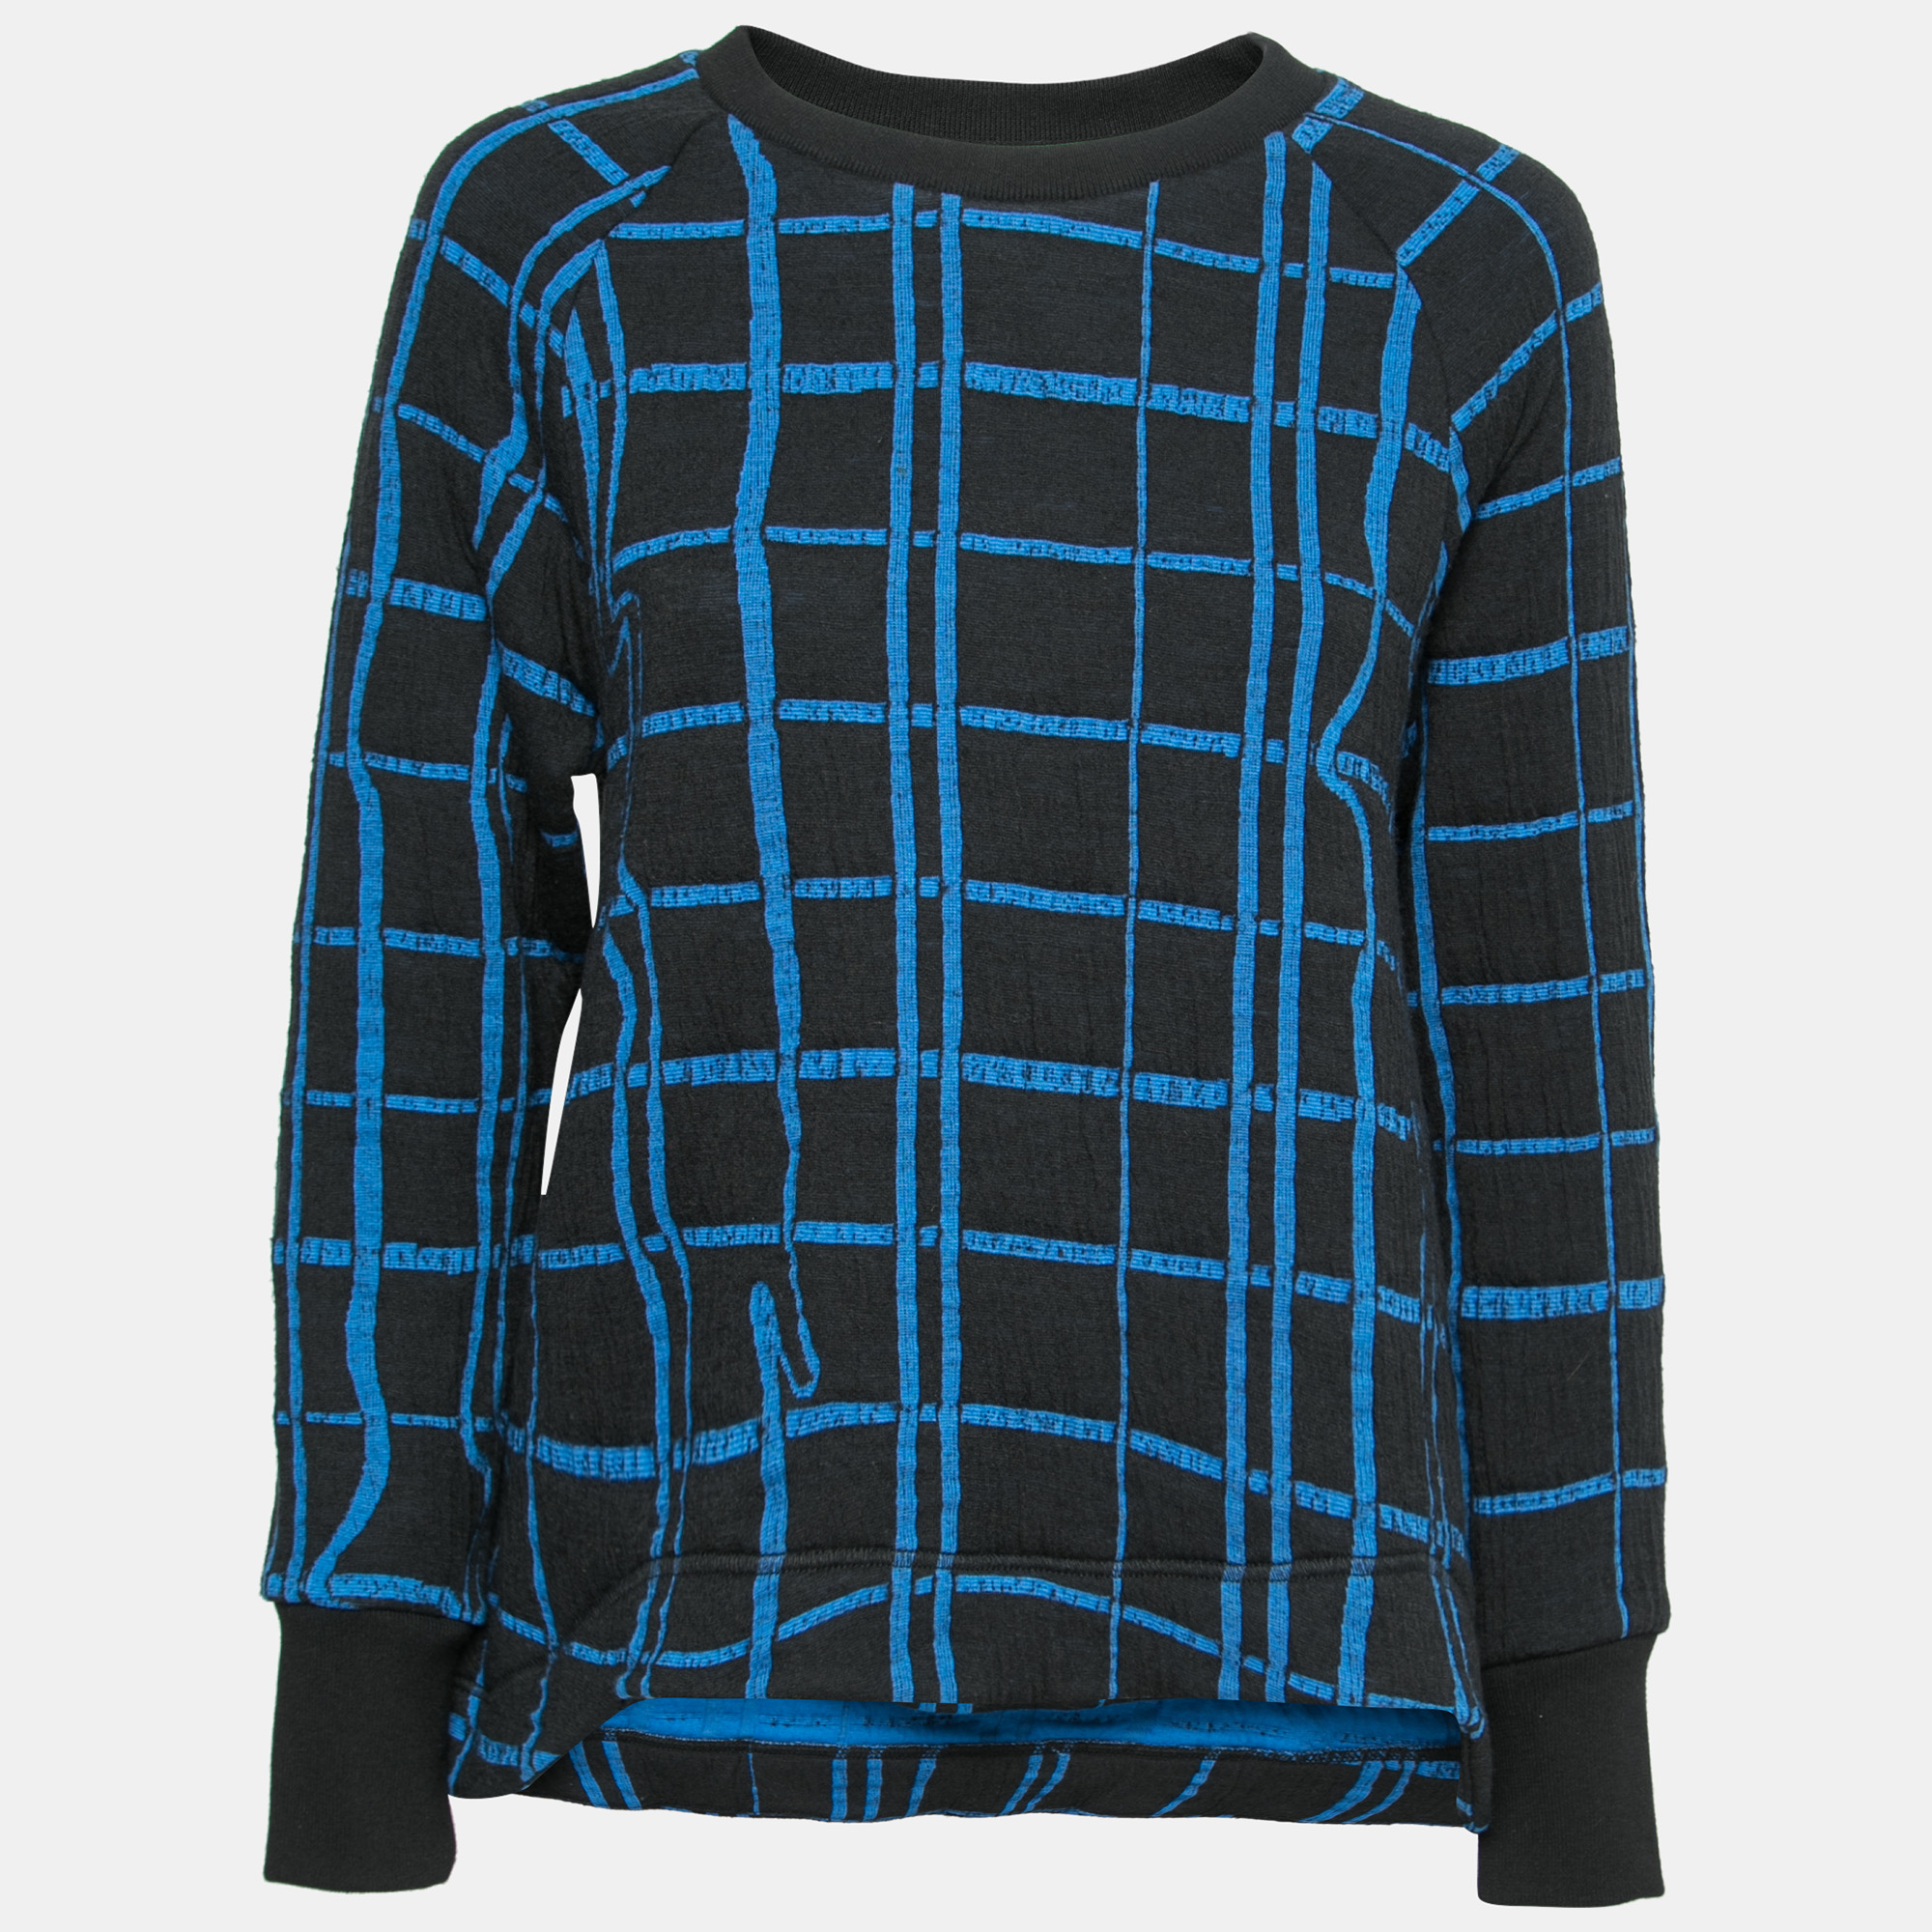 Kenzo Blue And Black Checkered Printed Knit Long Sleeve Crew Neck Sweater L